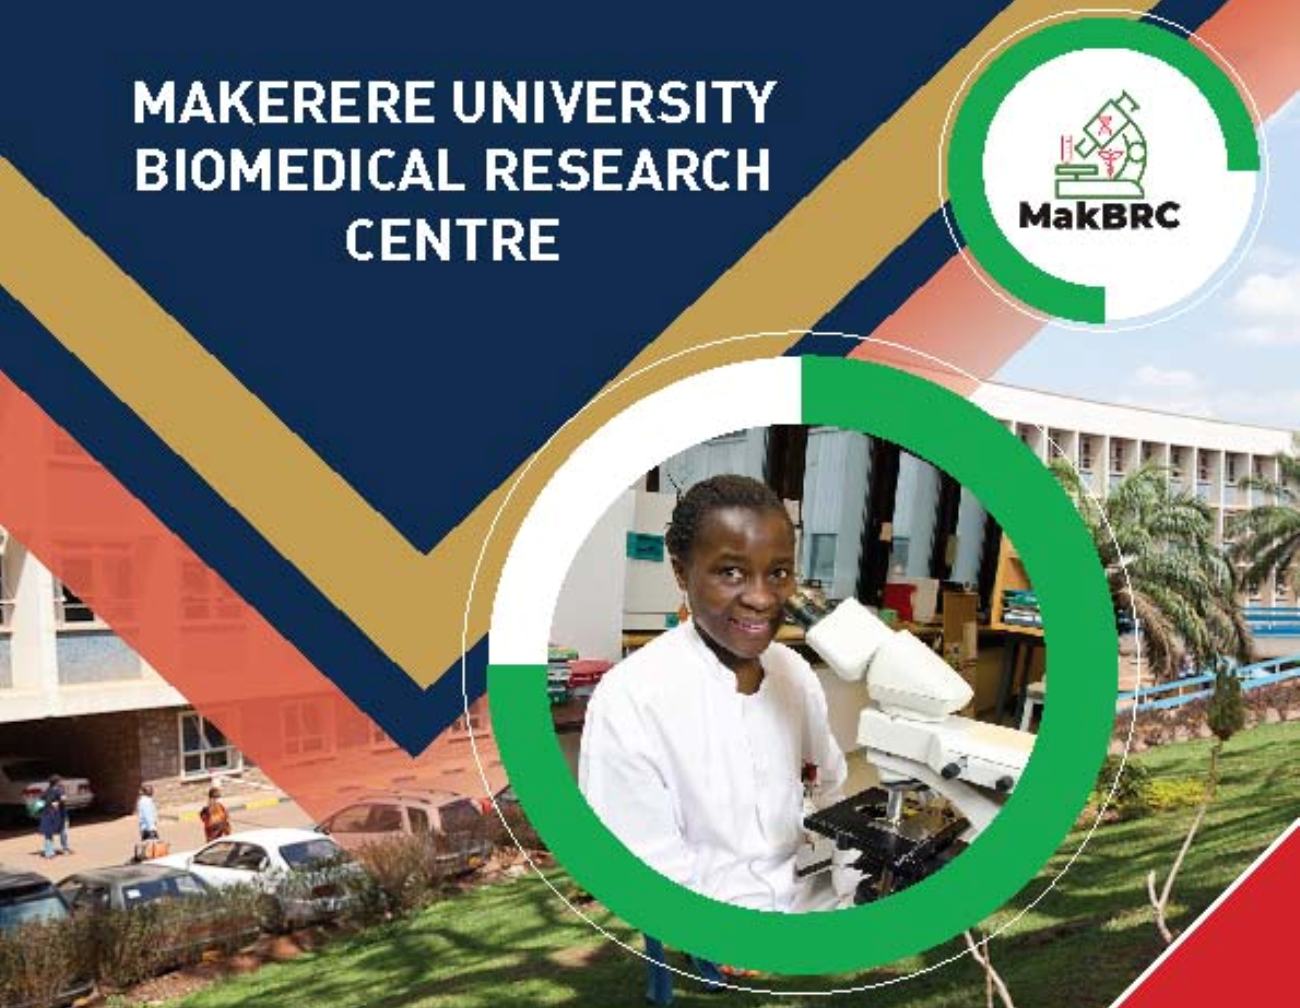 Cover page of the Makerere University Biomedical Research Centre (MakBRC) Annual Report 2020-2021.